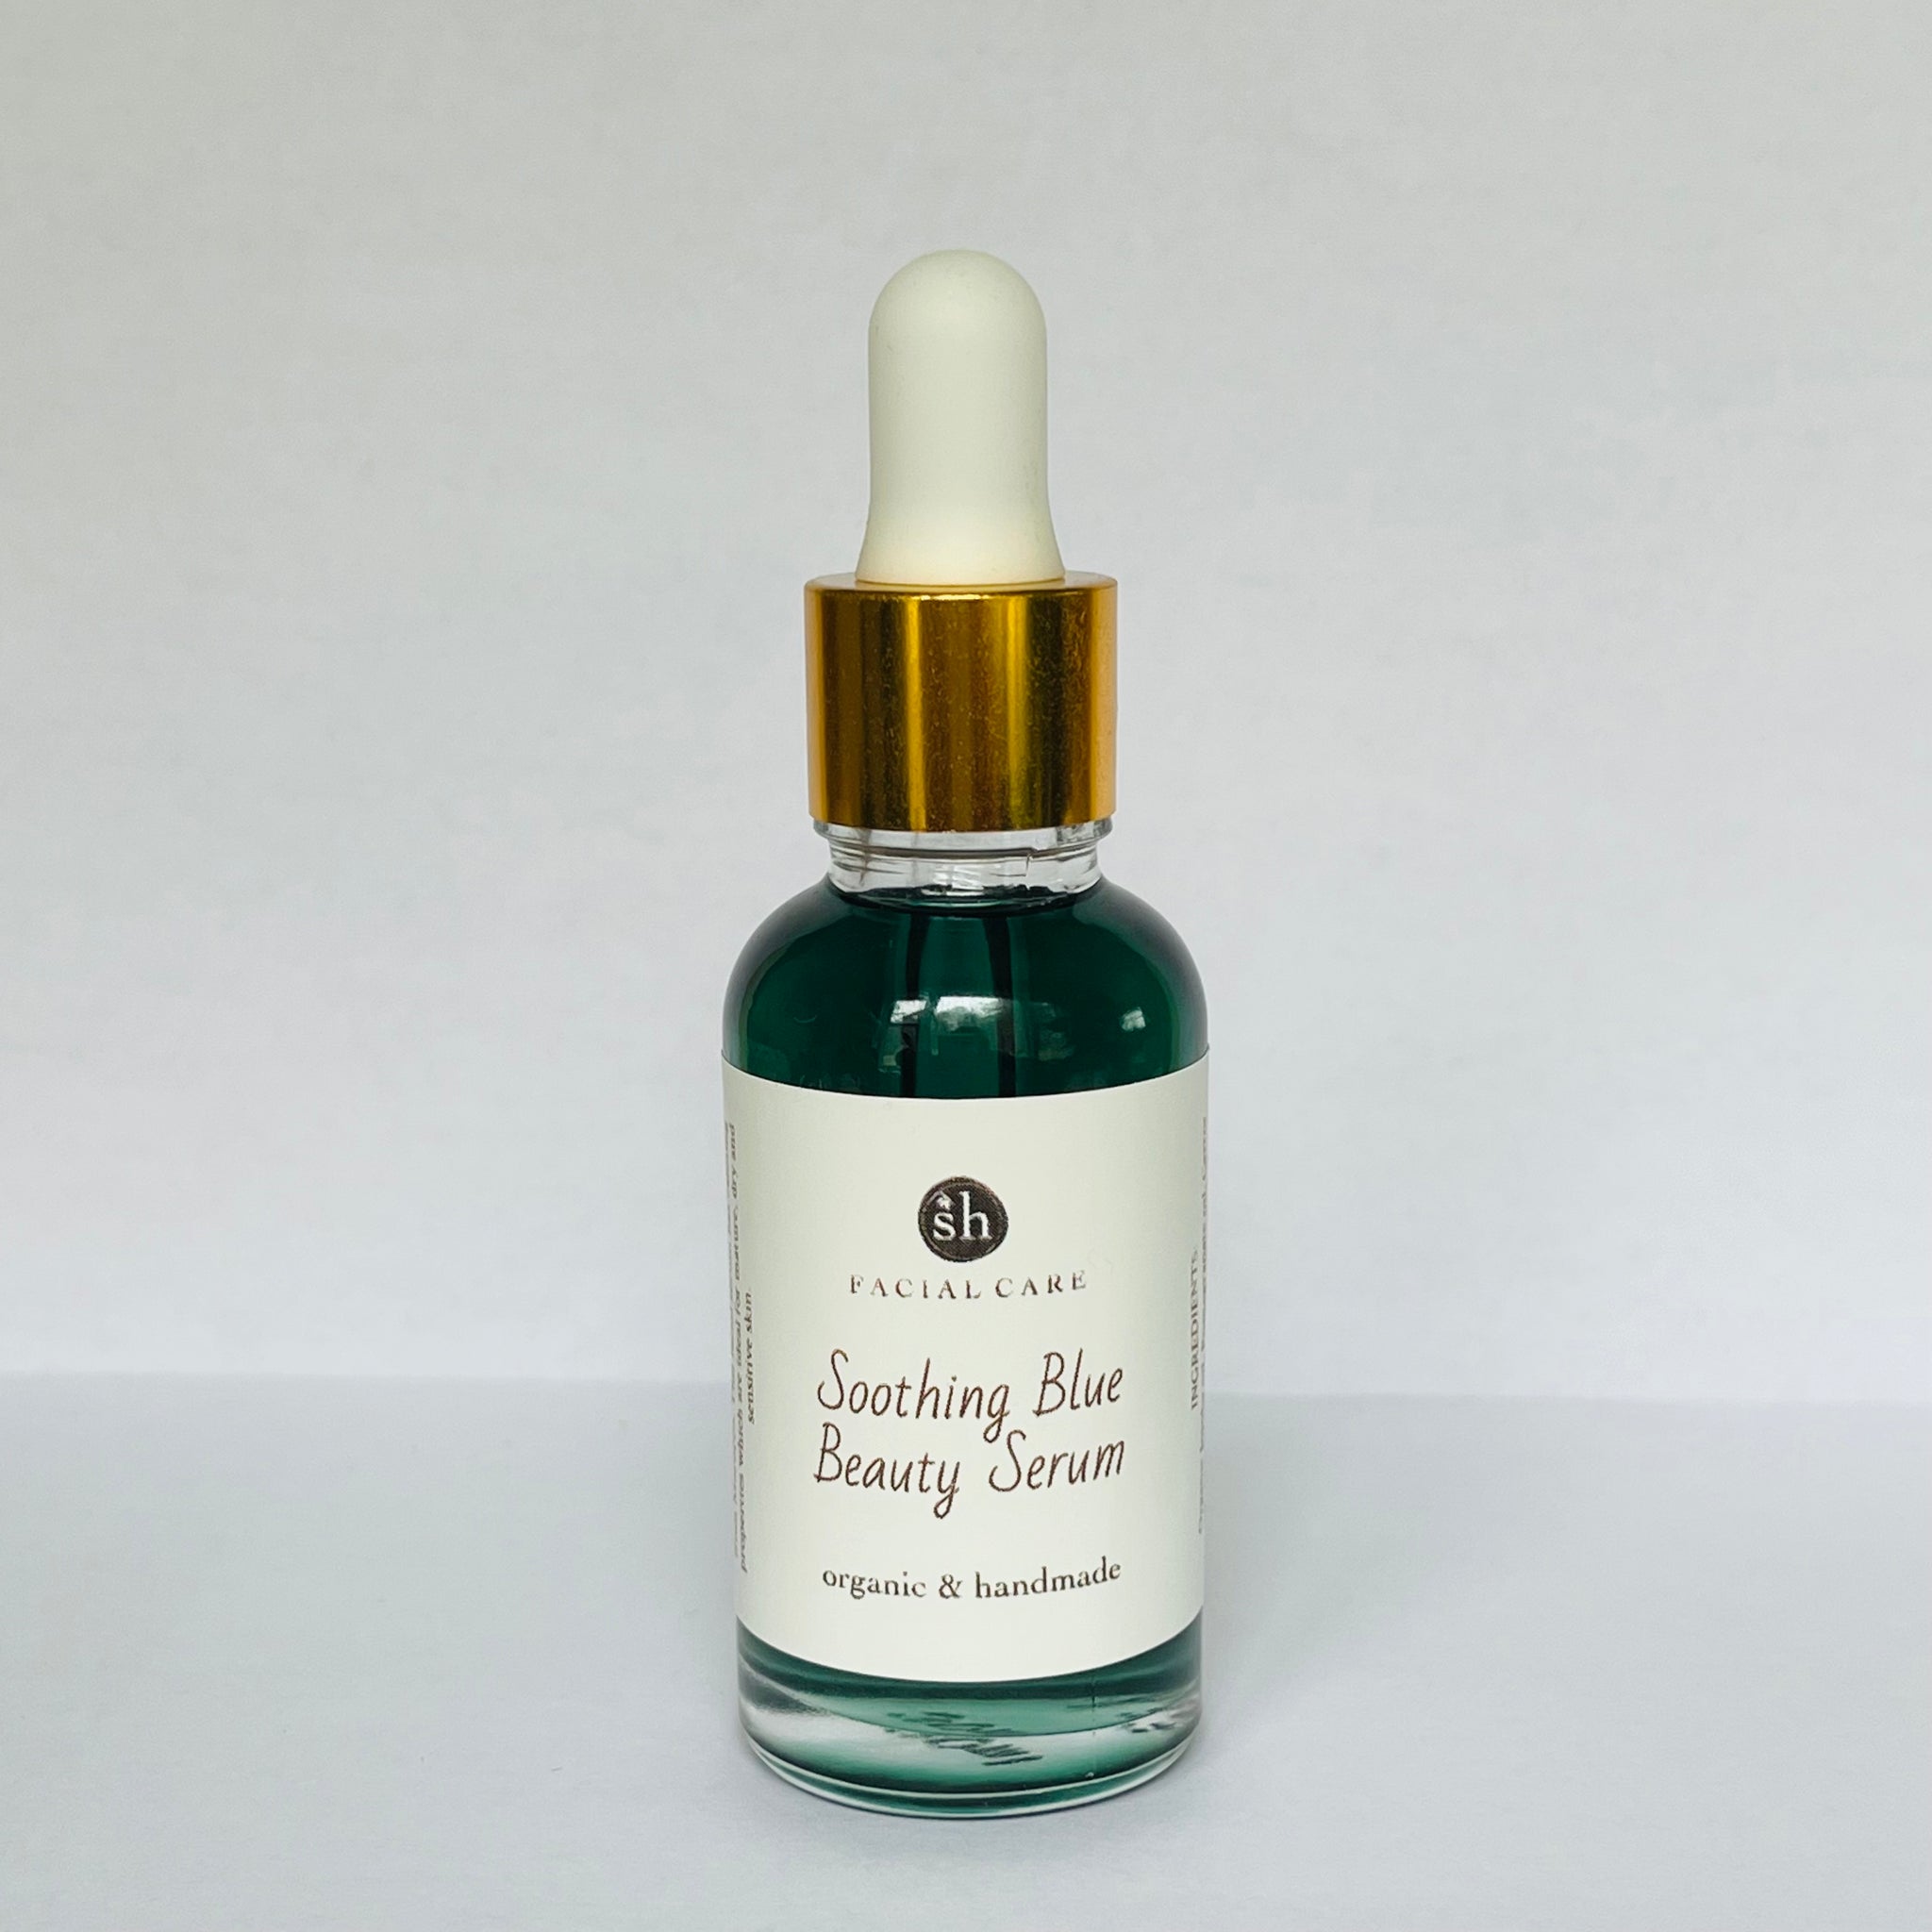 Soothing Blue Beauty Serum